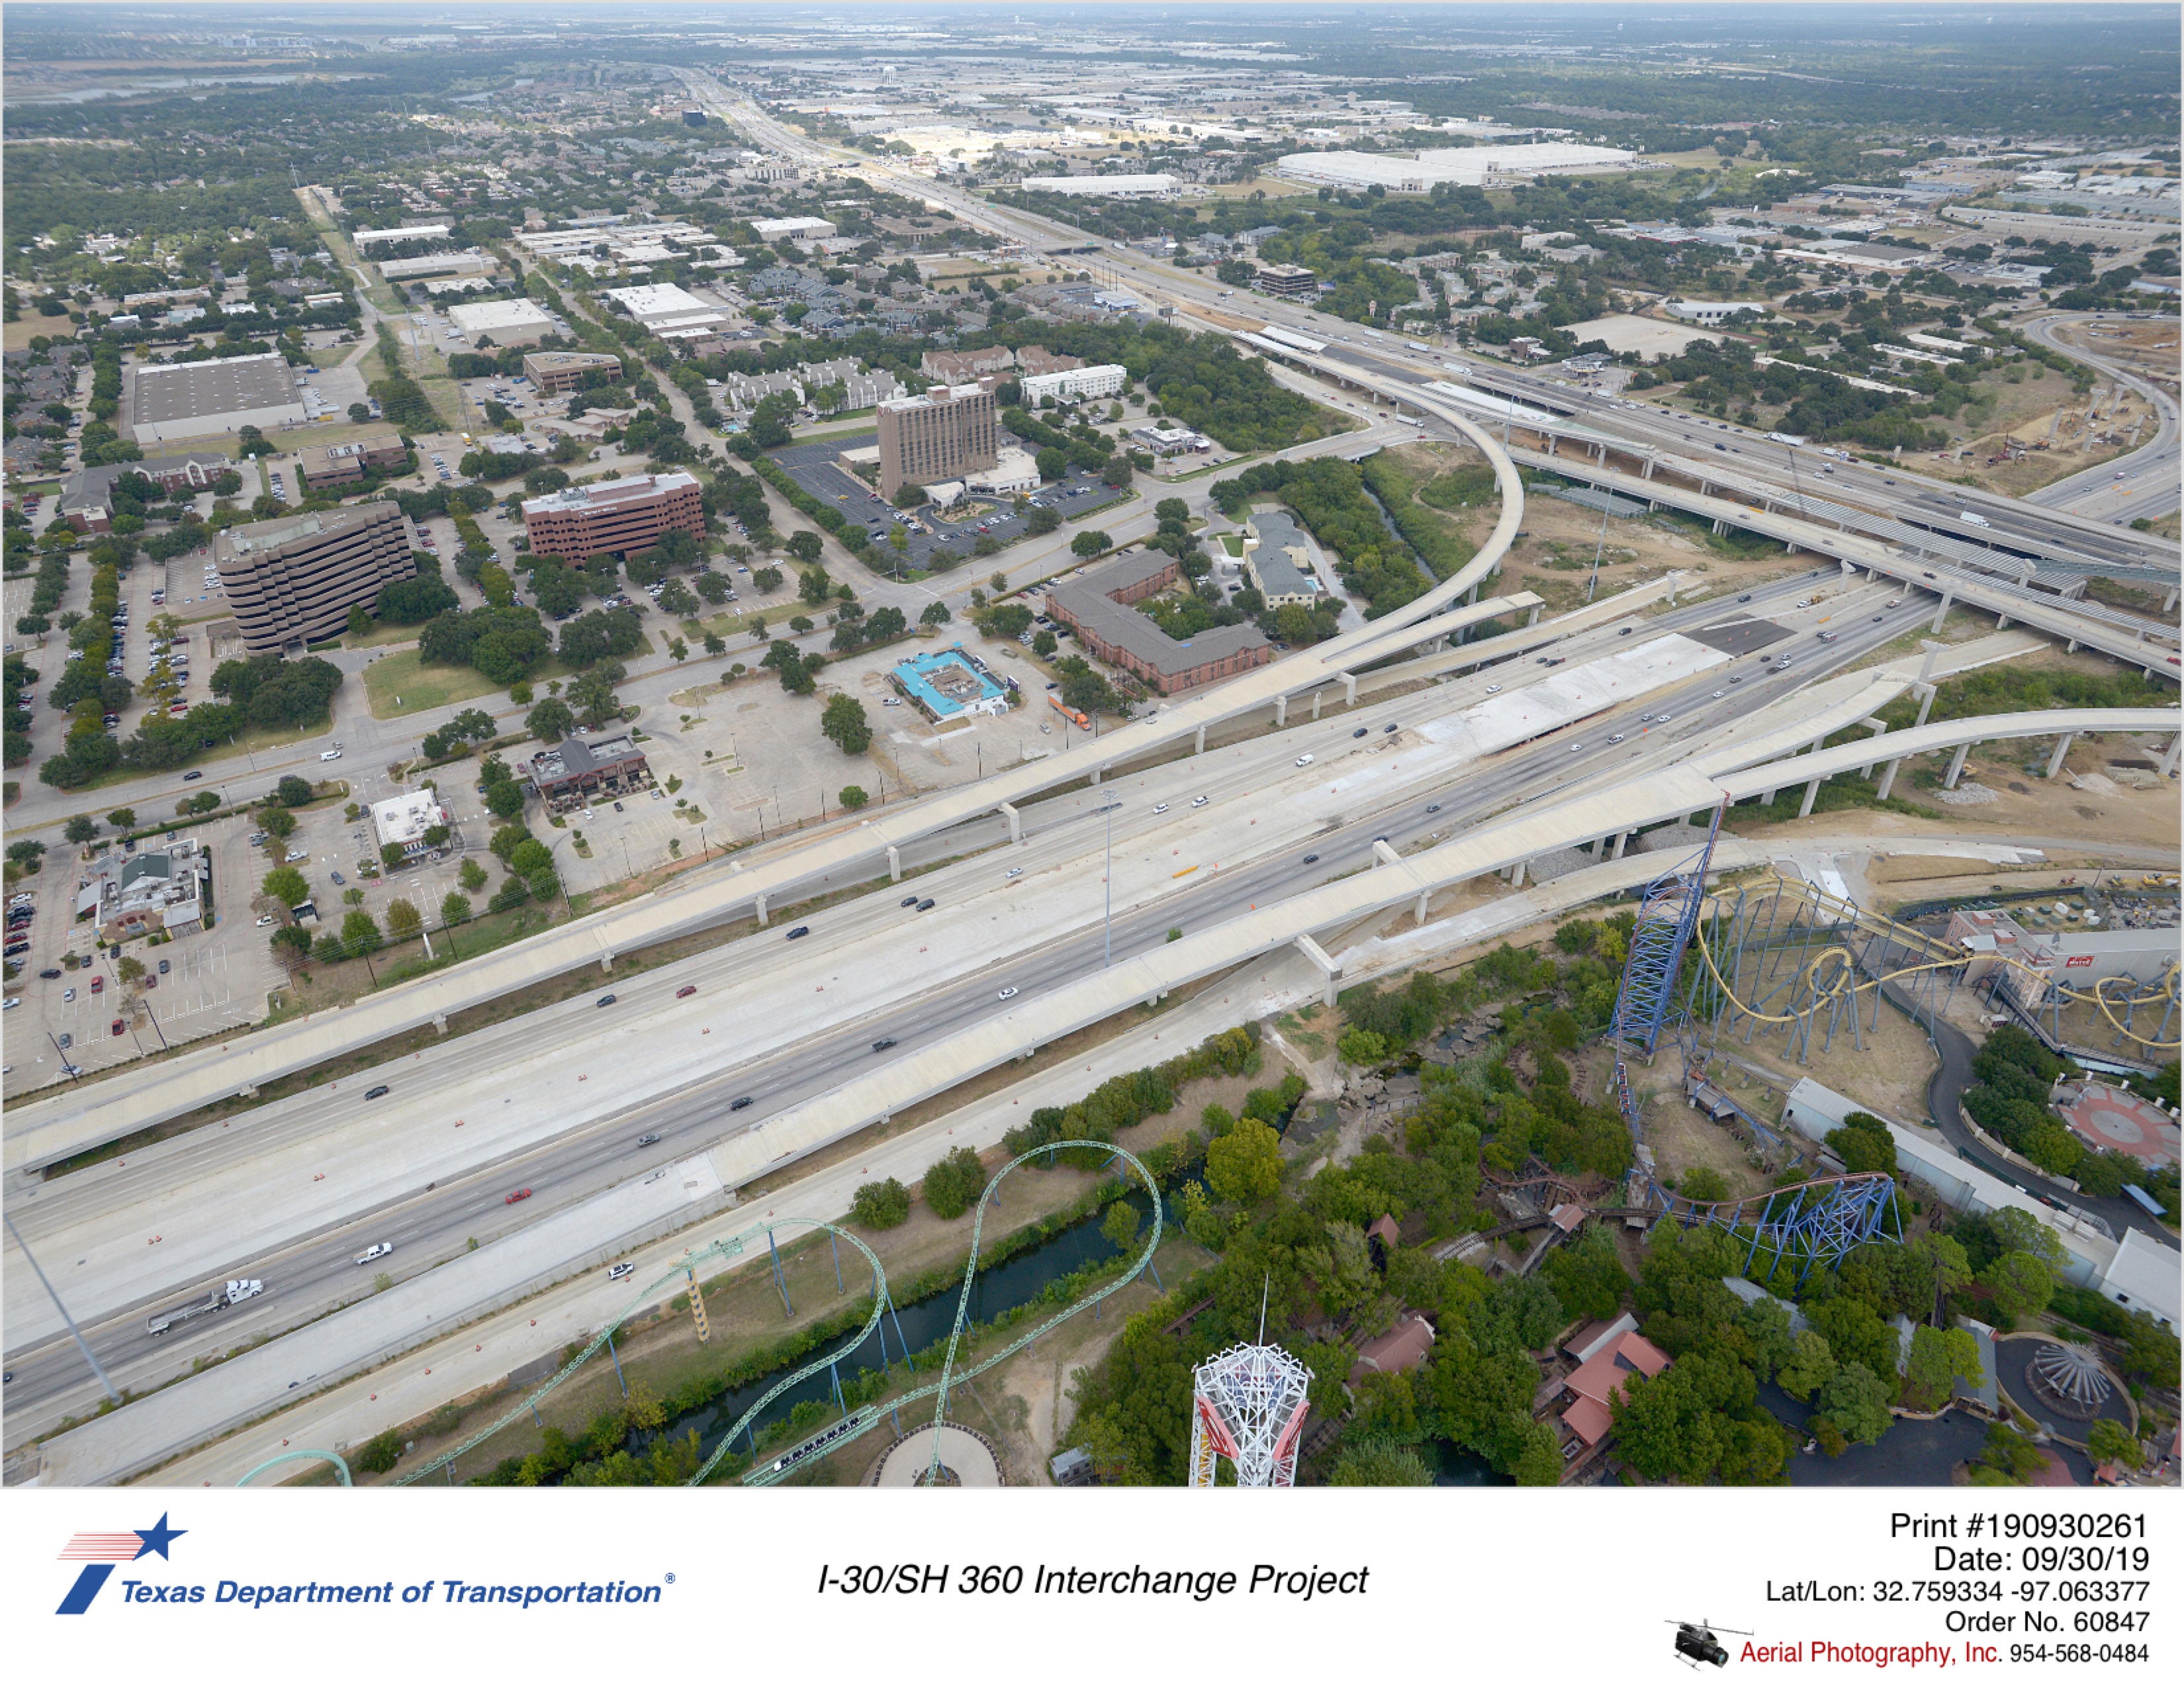 I-30 construction looking northeast at SH 360 underpass. Completed paving work Johnson Creek to west. New direct connector construction continuing.